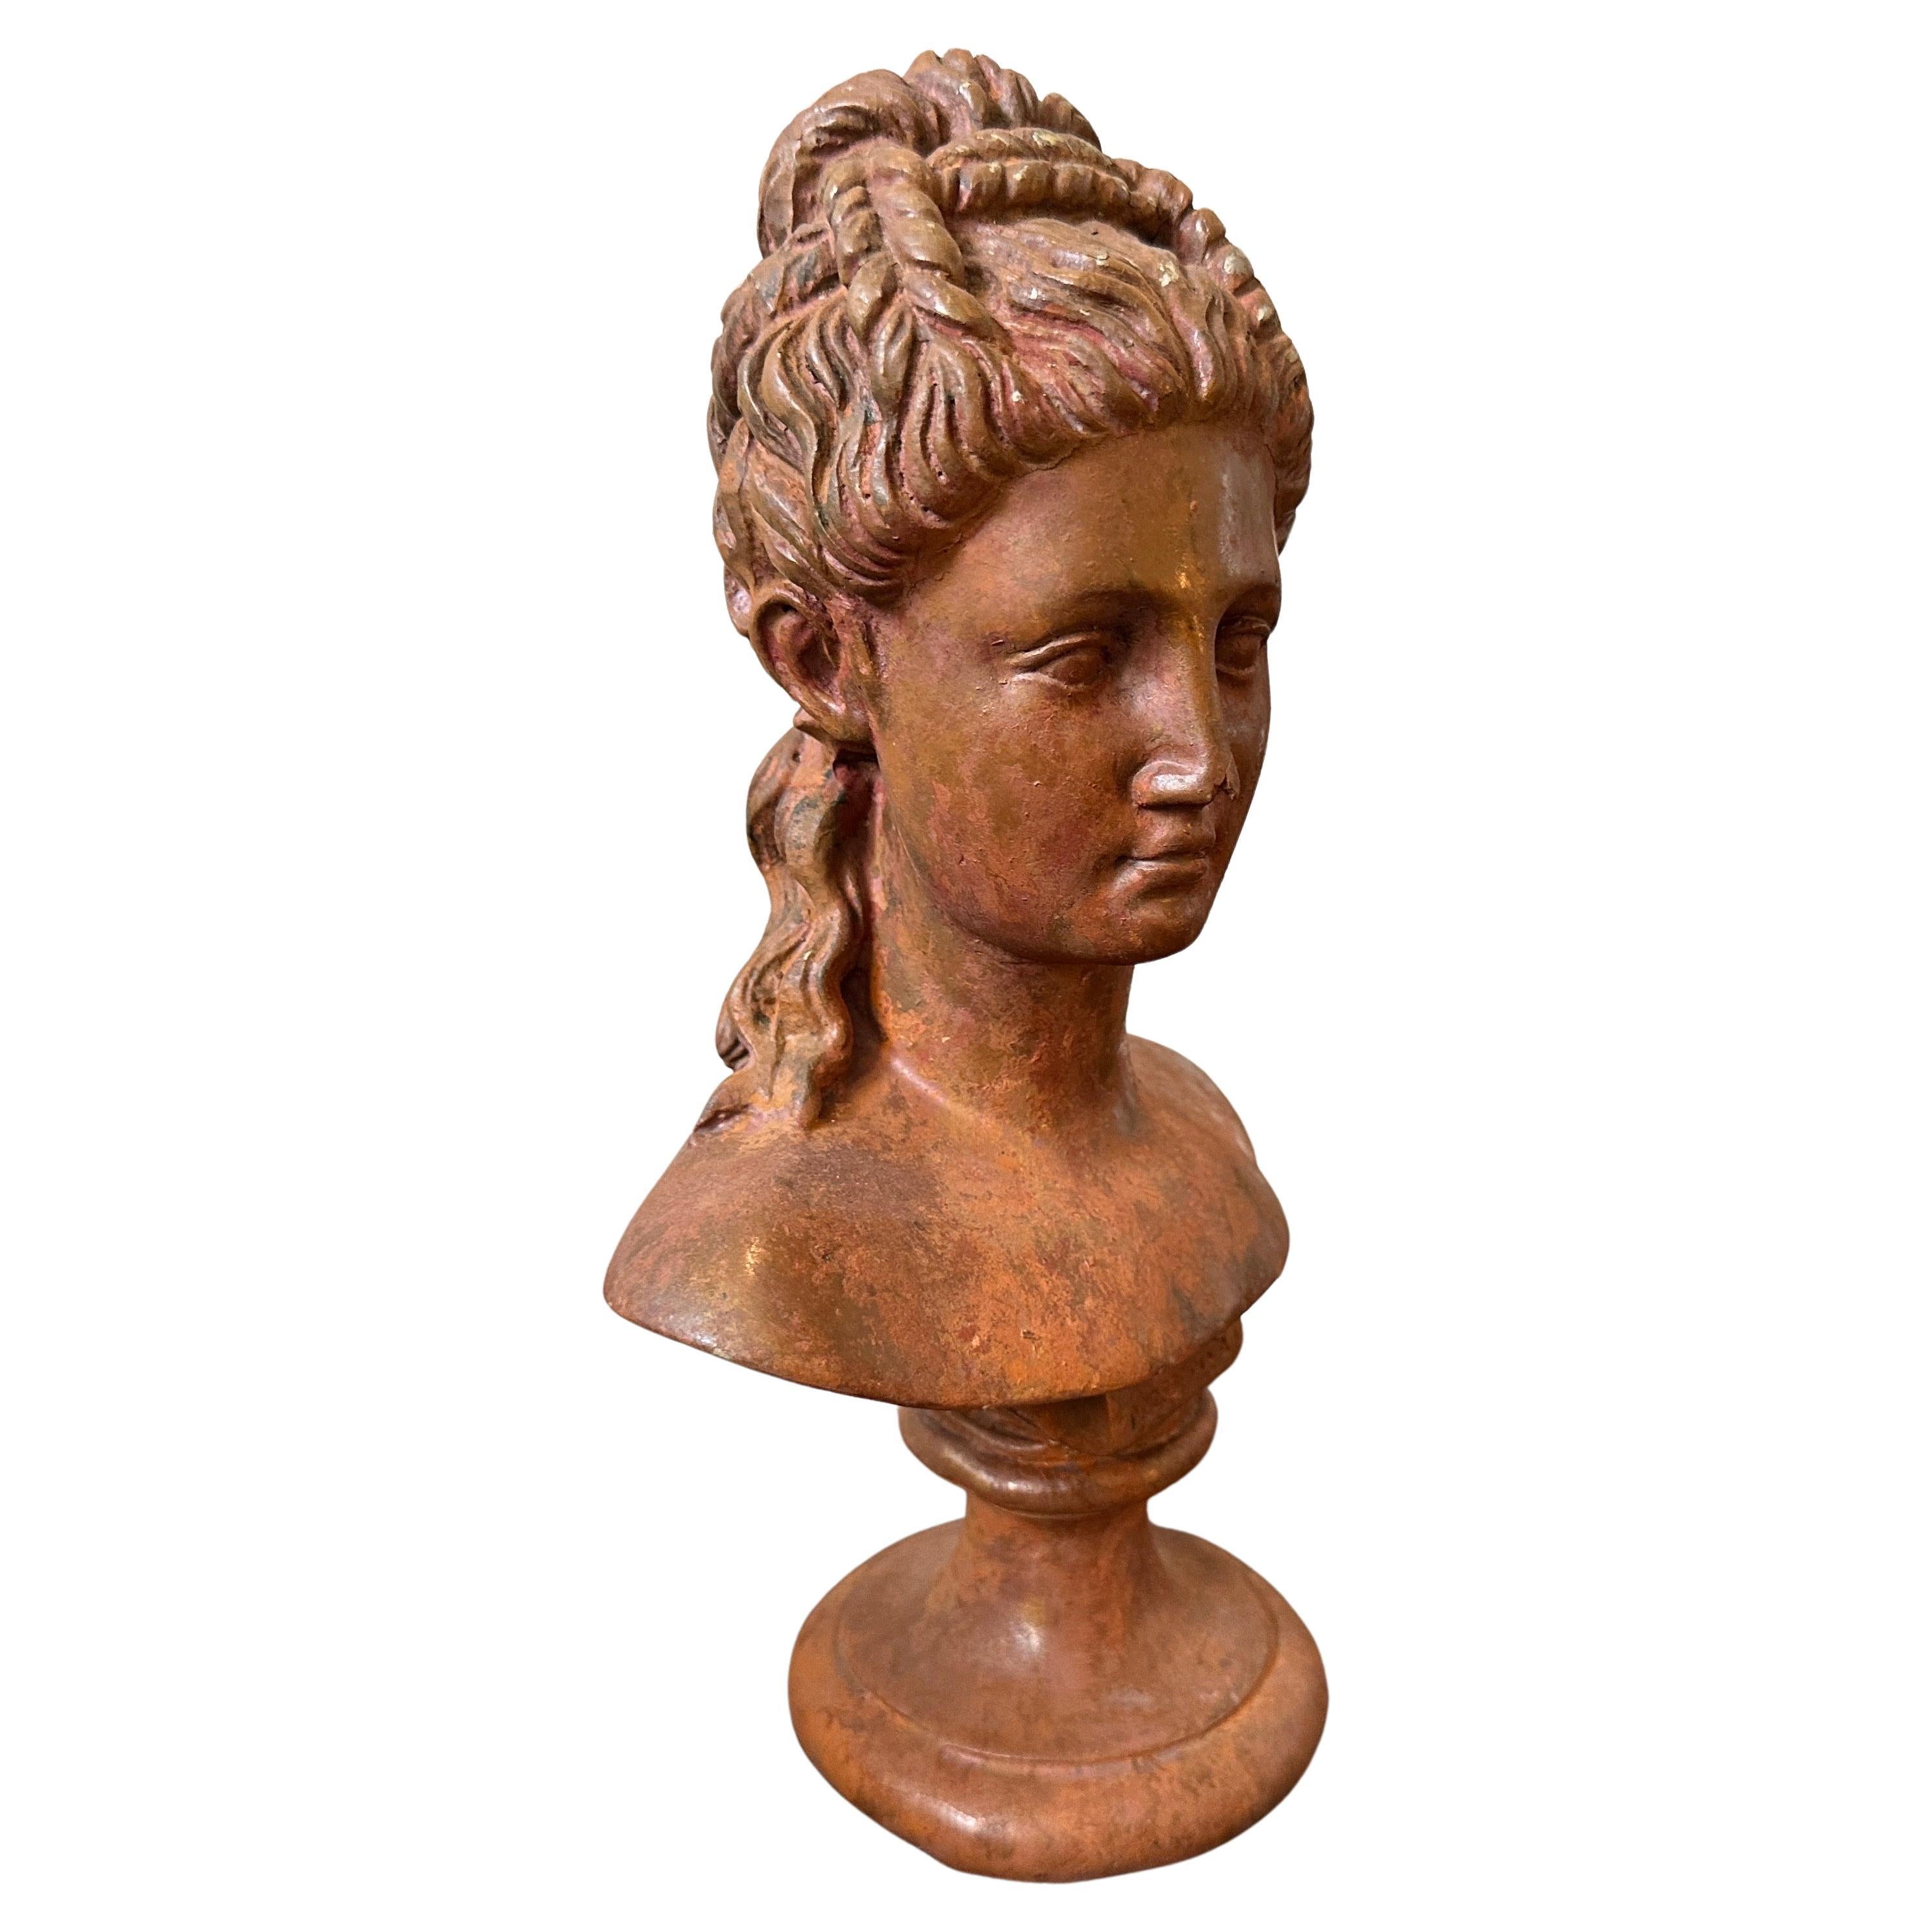 A red patina metal bust of a woman manufatured in Italy in early 19th century, good conditions overall, metal it has this brick red patina probably due to exposure to the natural elements. The Woman bust  is an exquisite piece of art that embodies